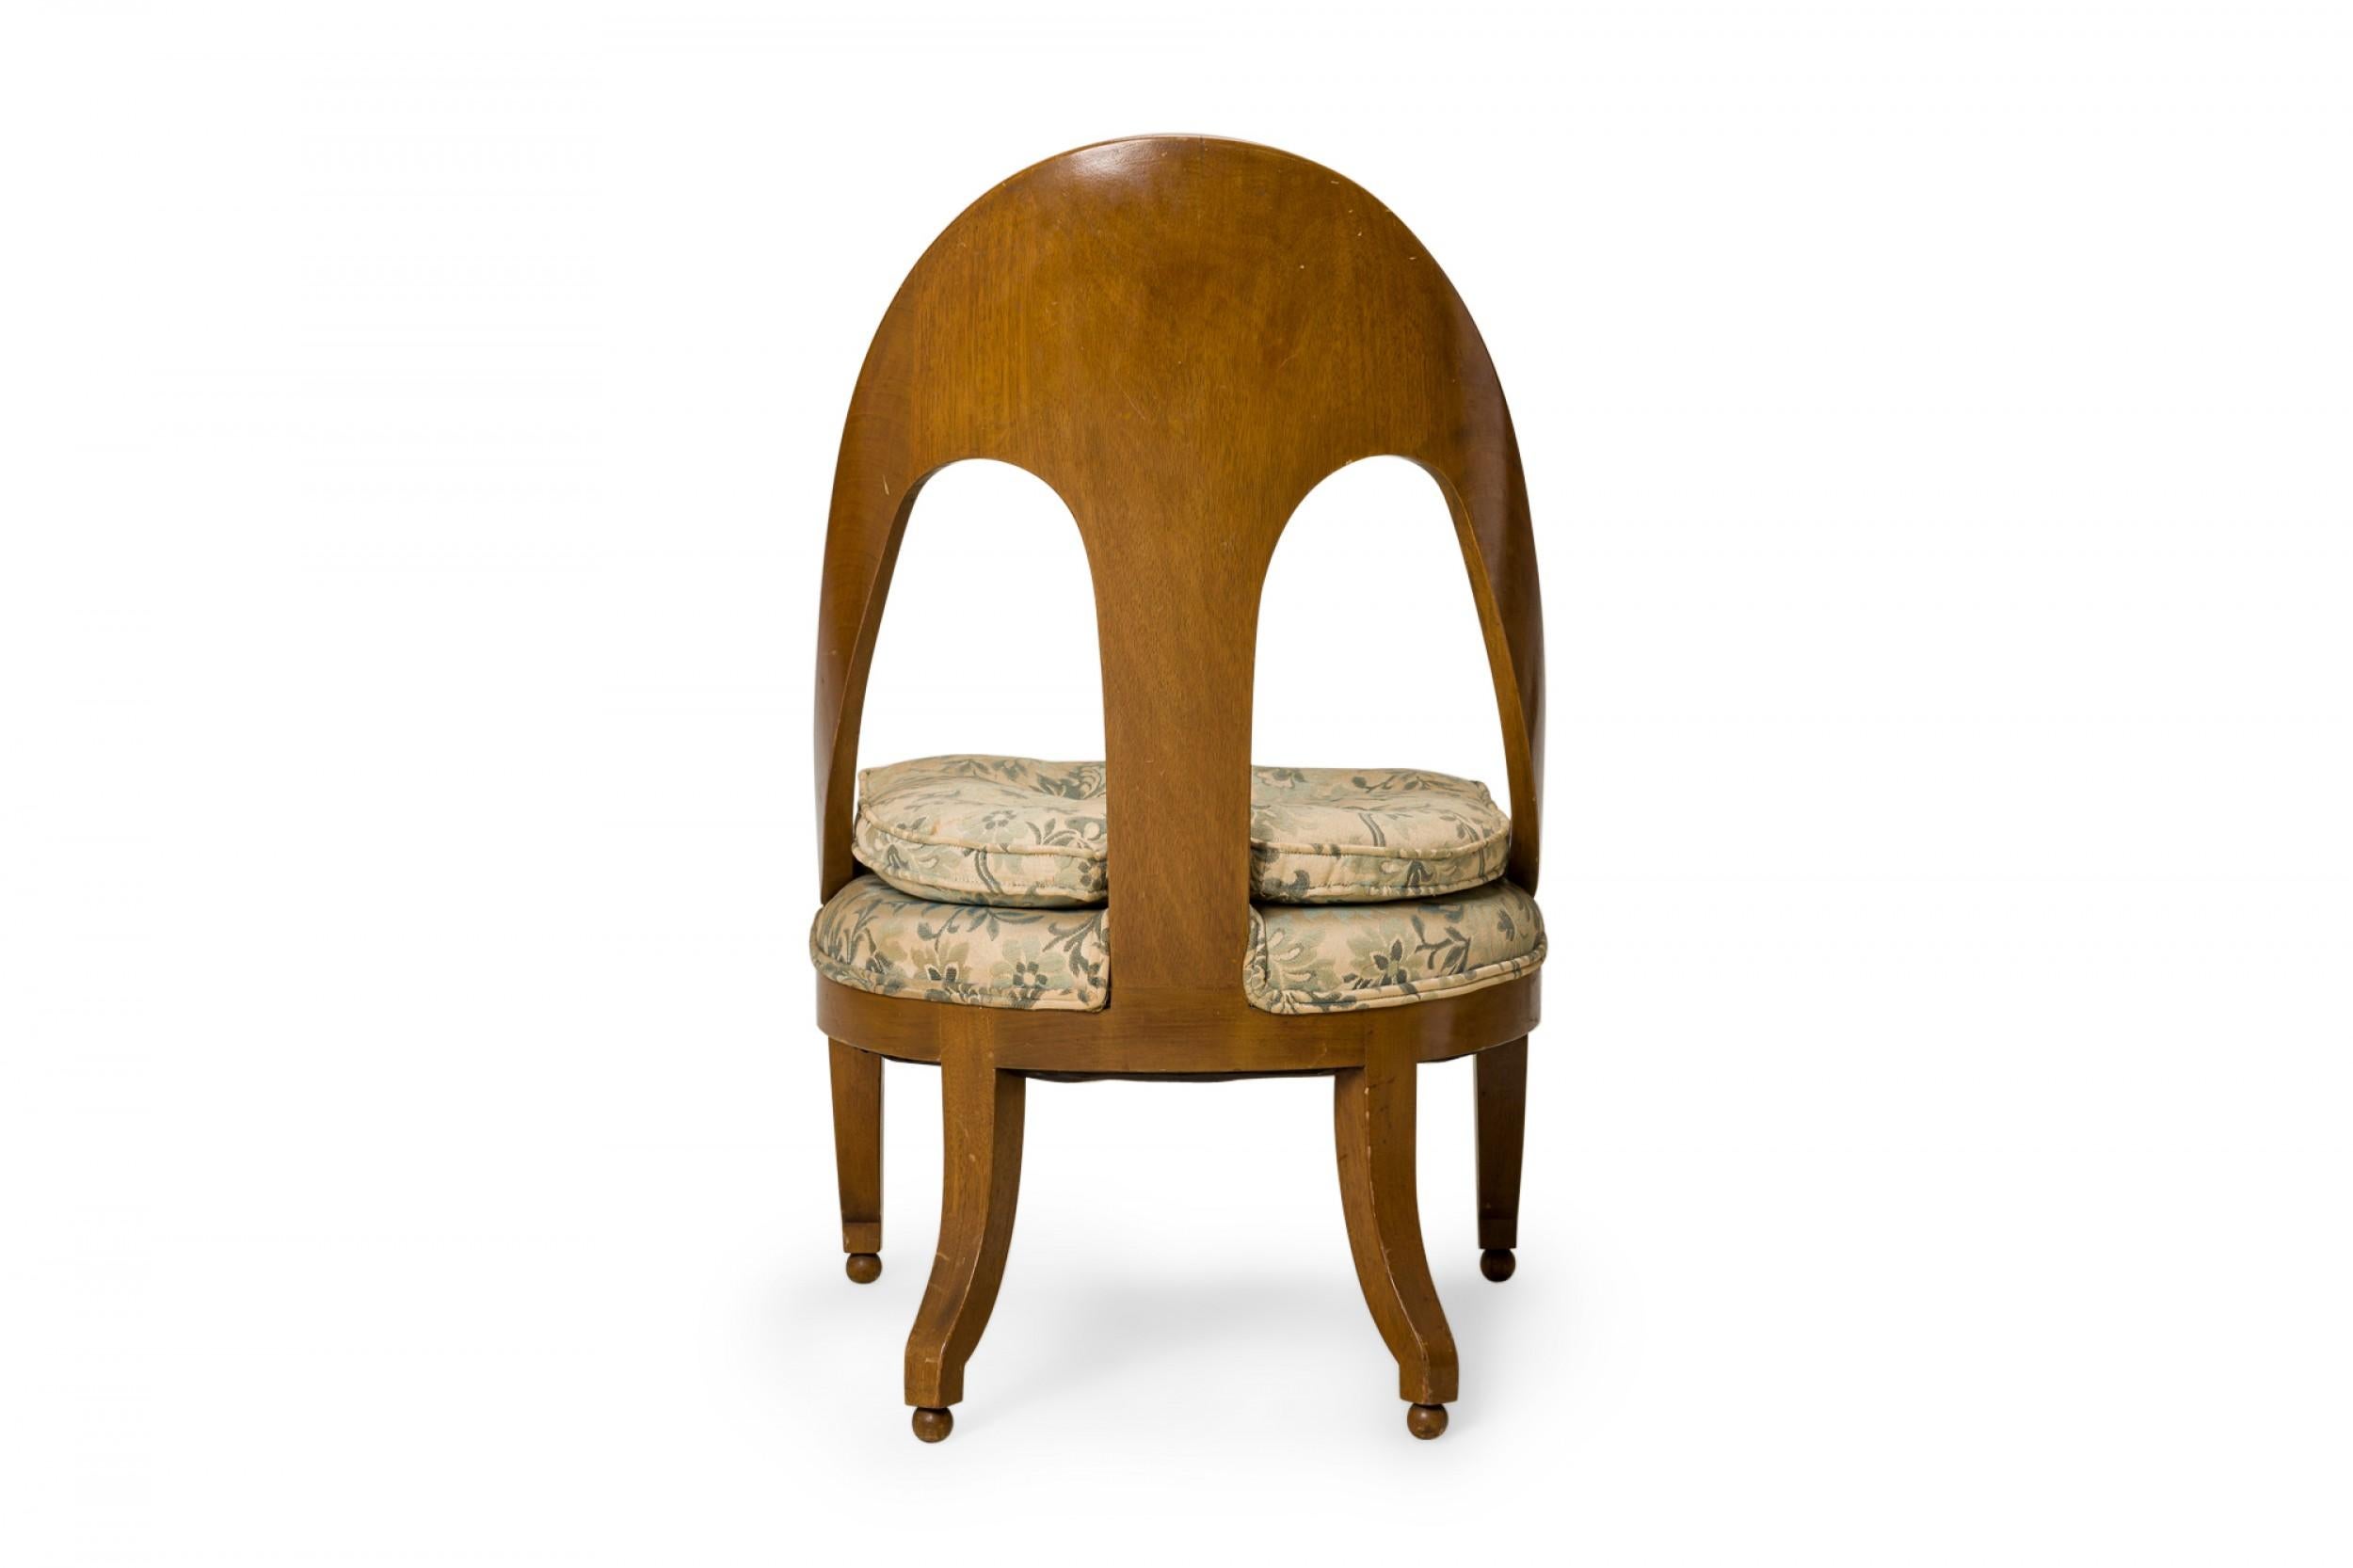 Walnut and Floral Fabric Upholstery Spoon Back Side Chair In Good Condition For Sale In New York, NY